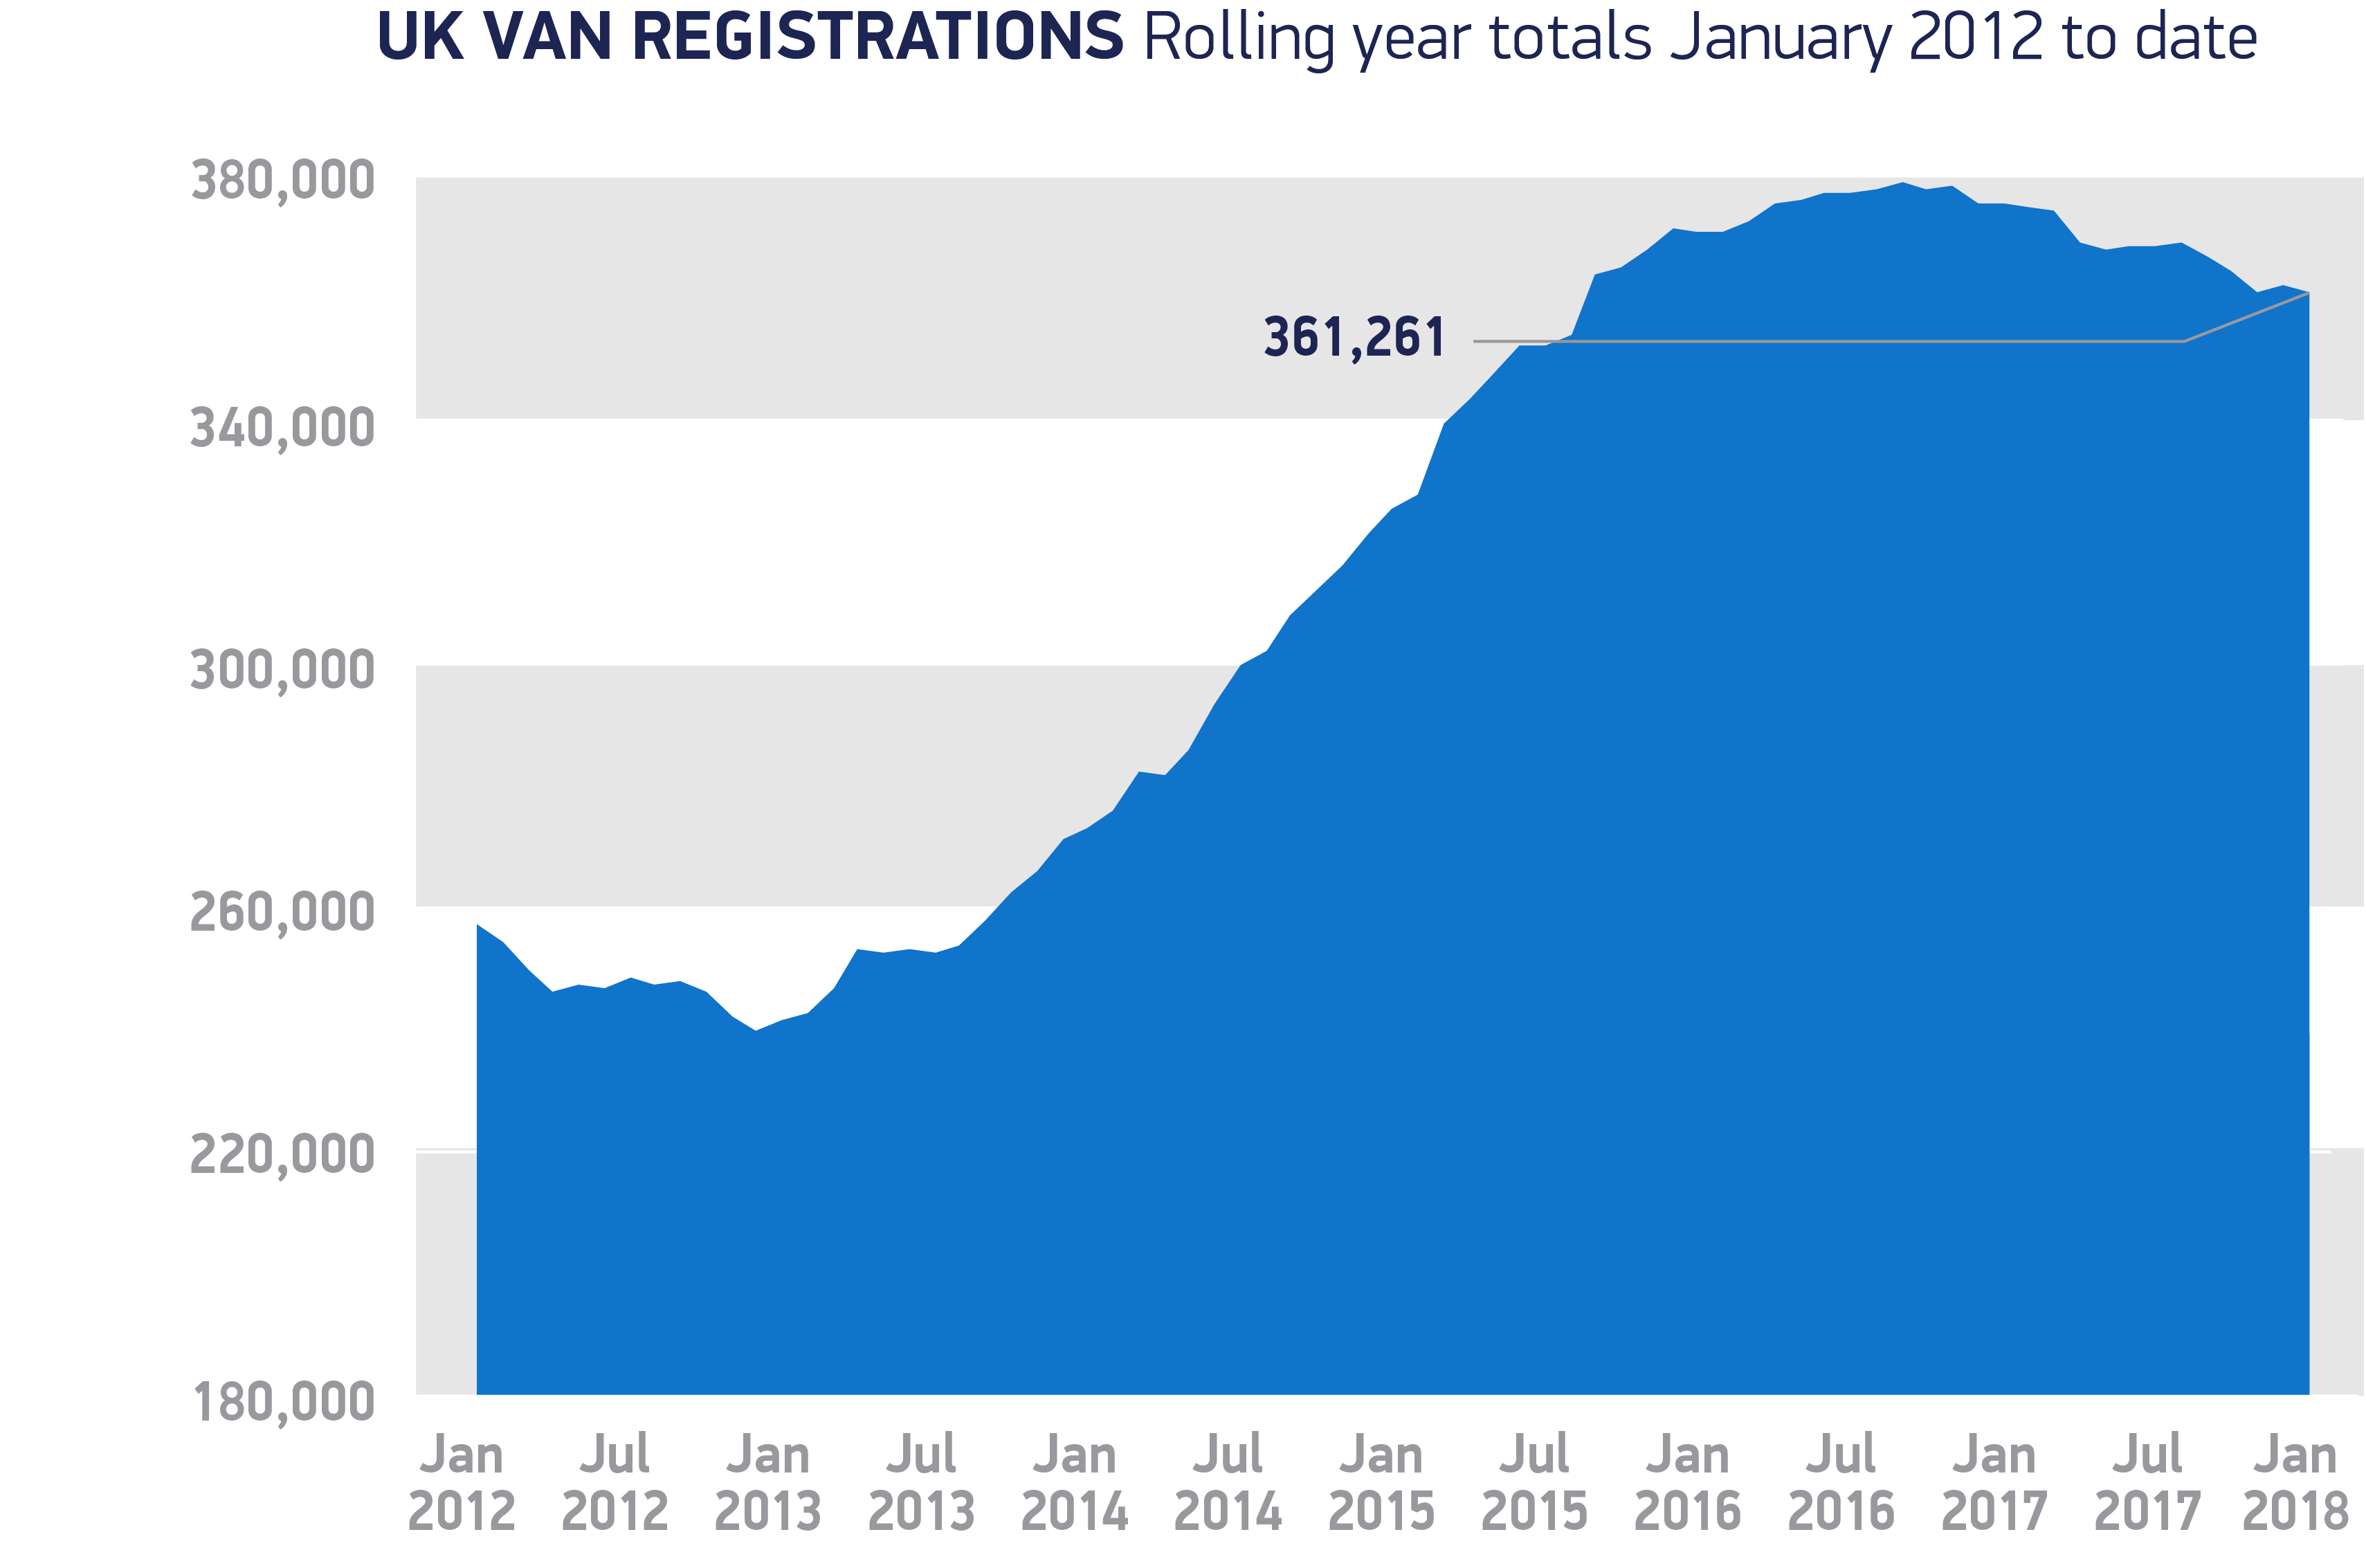 Van registrations rolling year totals January 2012 to-date 2018 chart